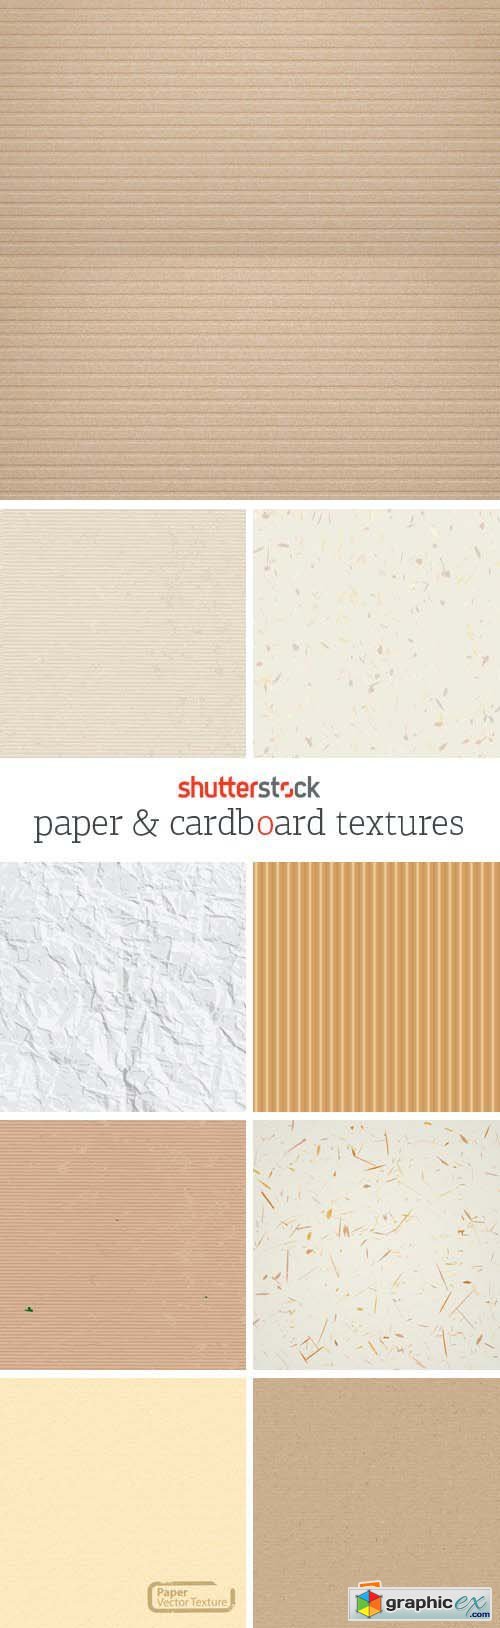 Amazing SS - Paper & Cardboard Textures, 25xEPS